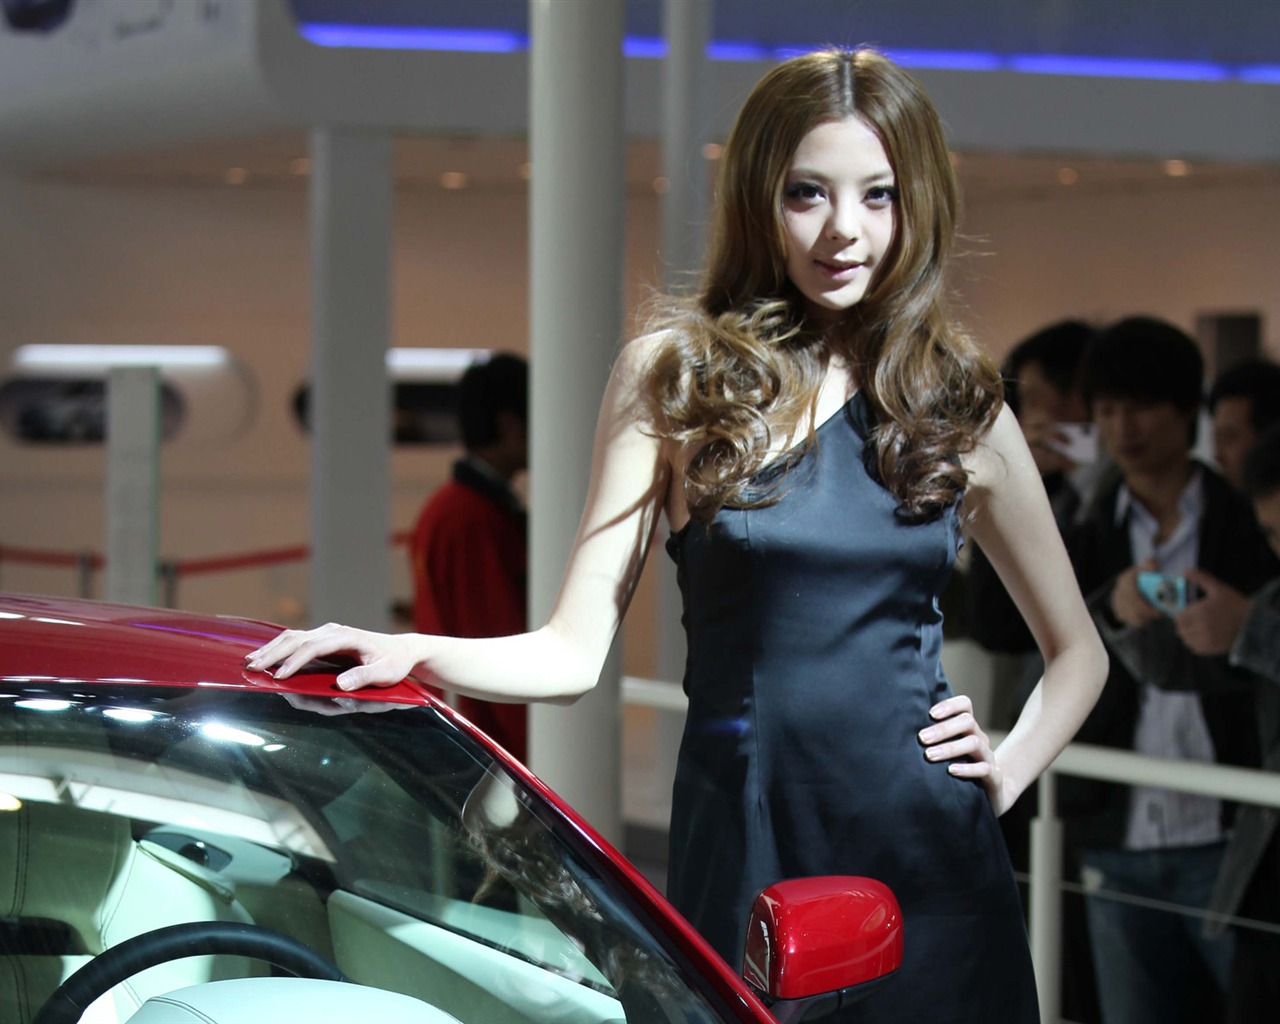 2010 Beijing International Auto Show beauty (1) (the wind chasing the clouds works) #28 - 1280x1024